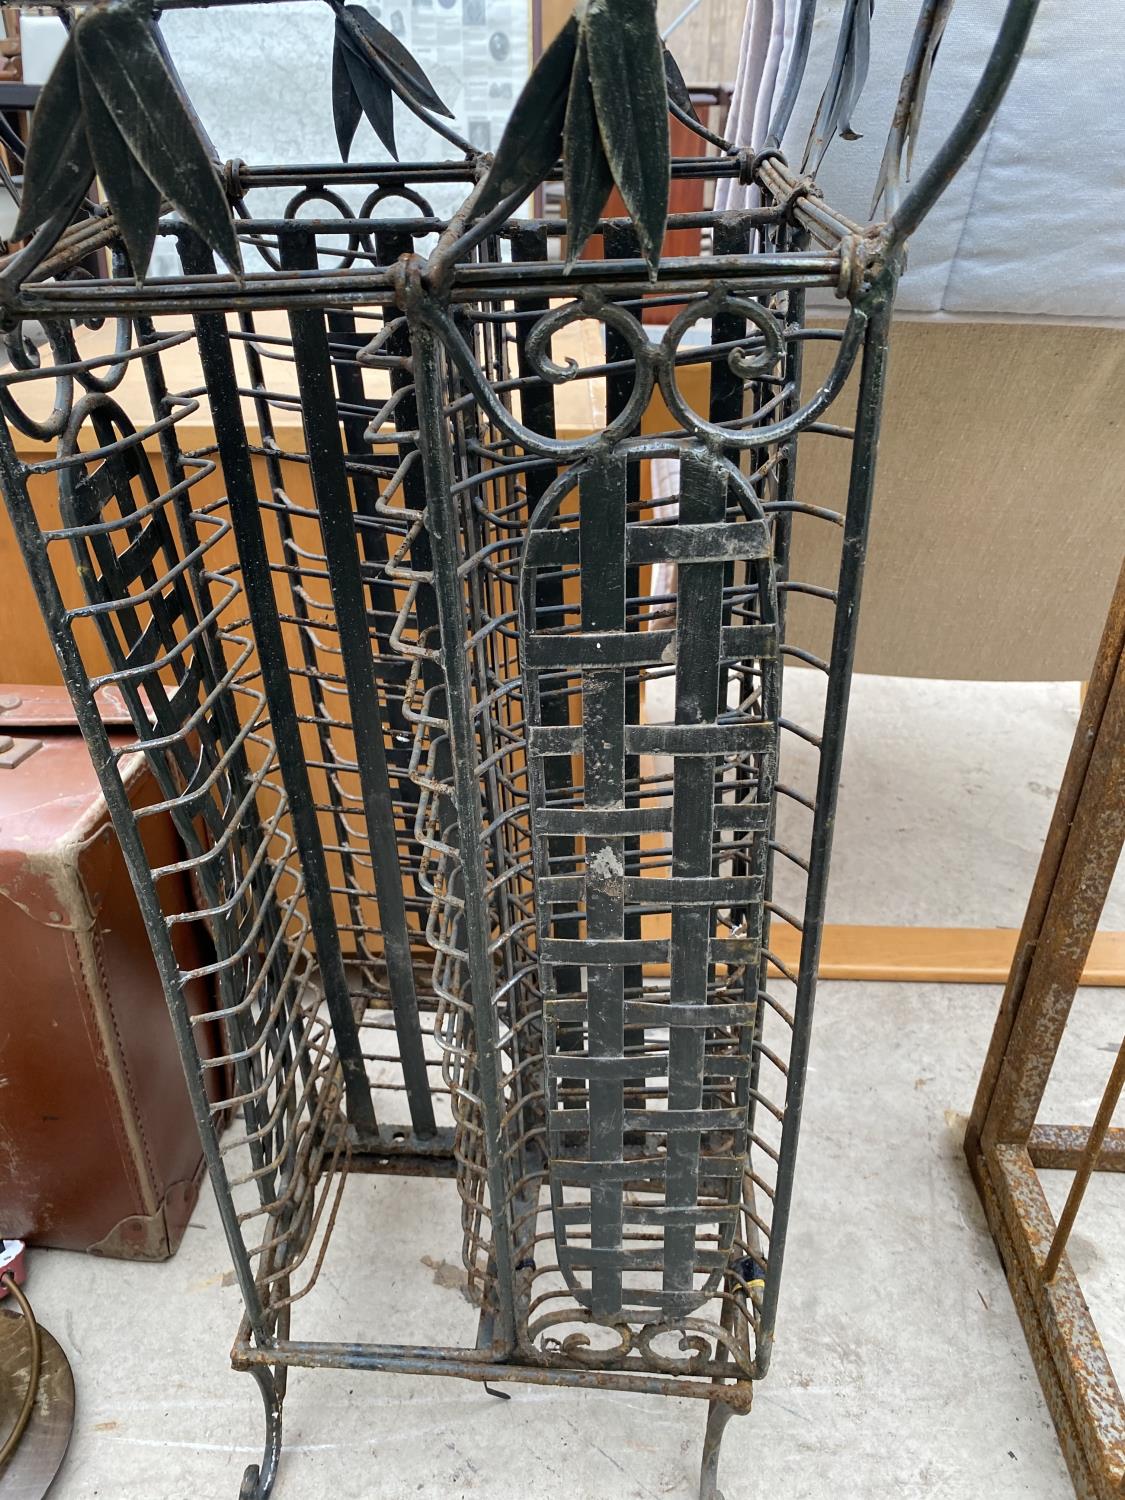 A VINTAGE KITCHEN STOOL WITH STEPS AND A VINTAGE METAL CD RACK - Image 3 of 5